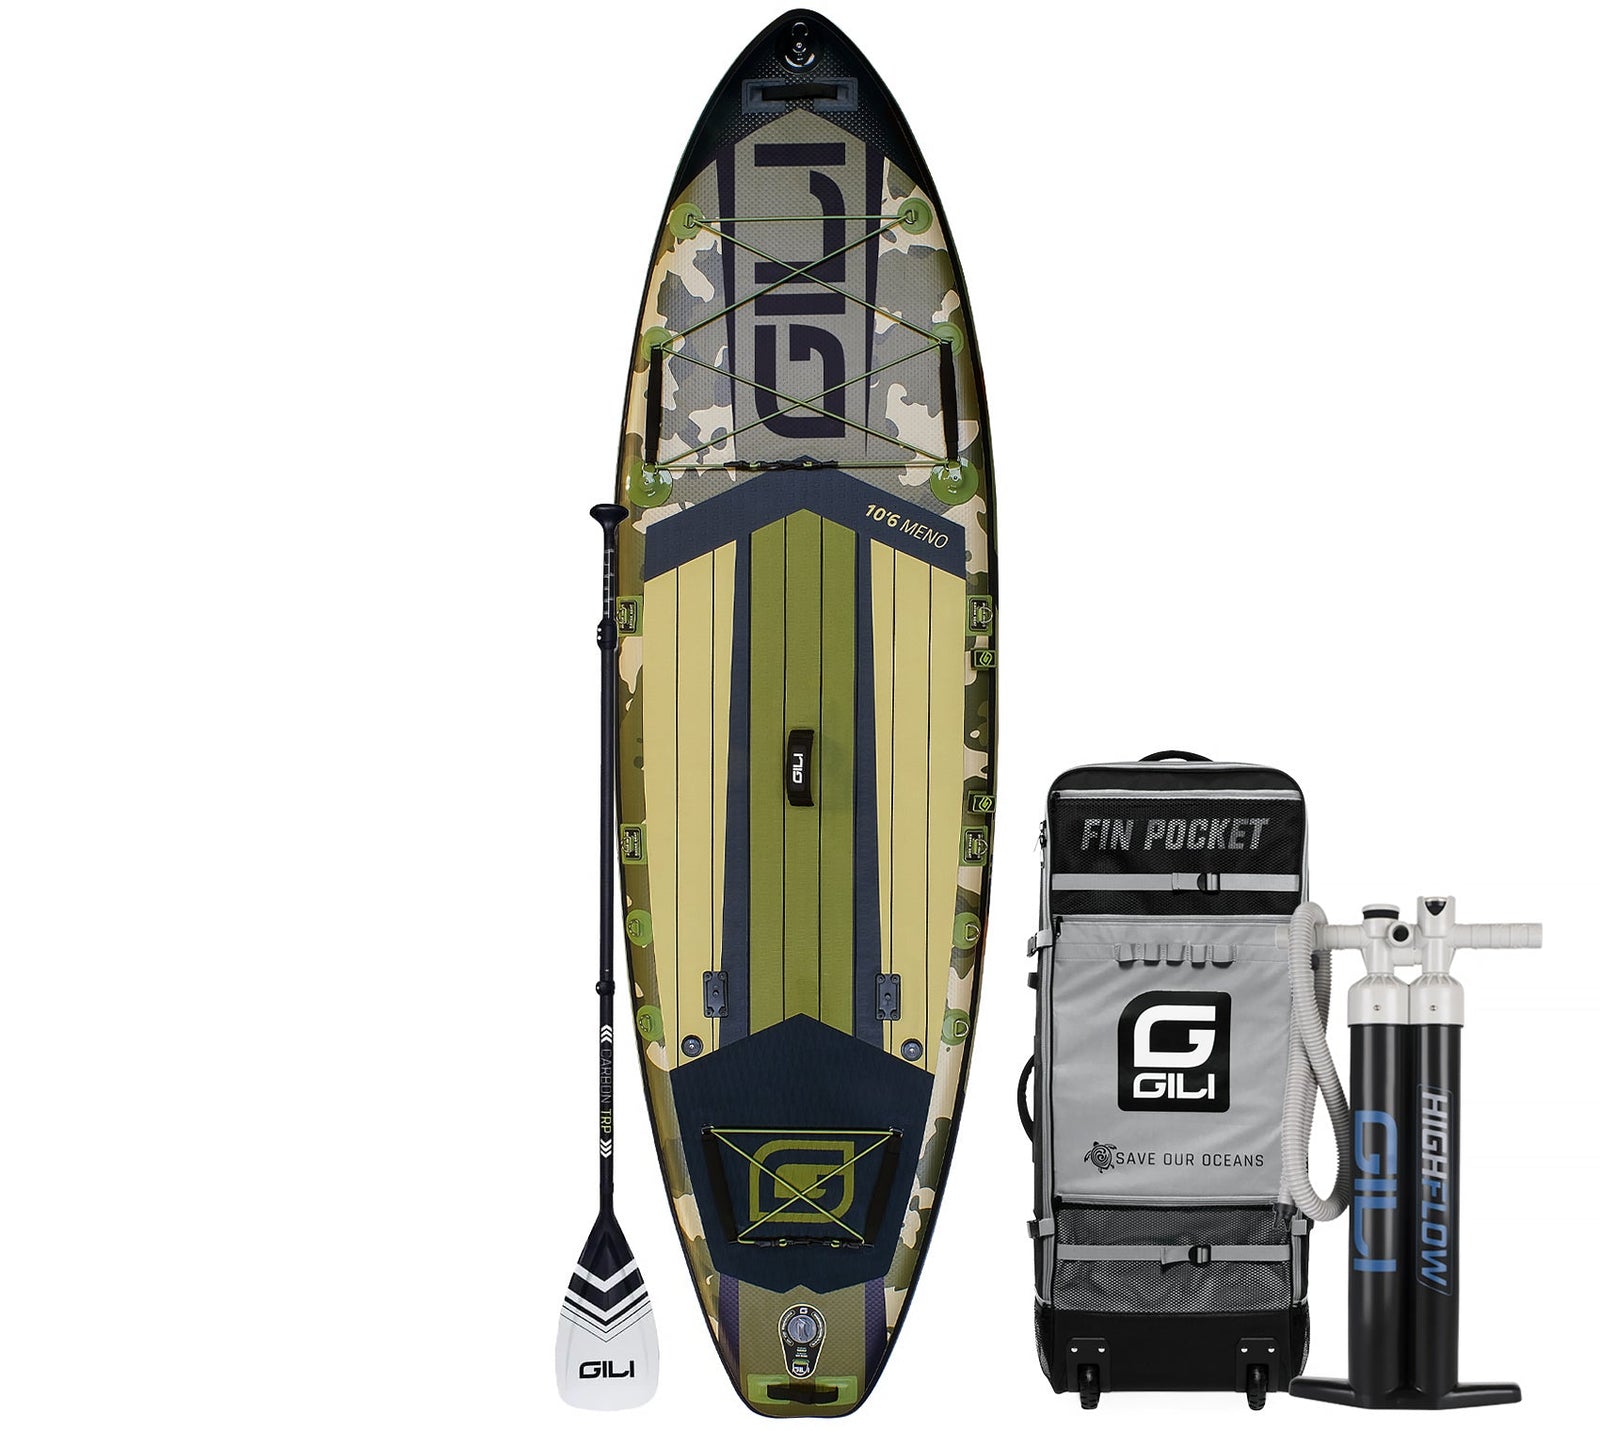 perspectief Briljant Muf Inflatable Paddle Boards - Gili Sports EU